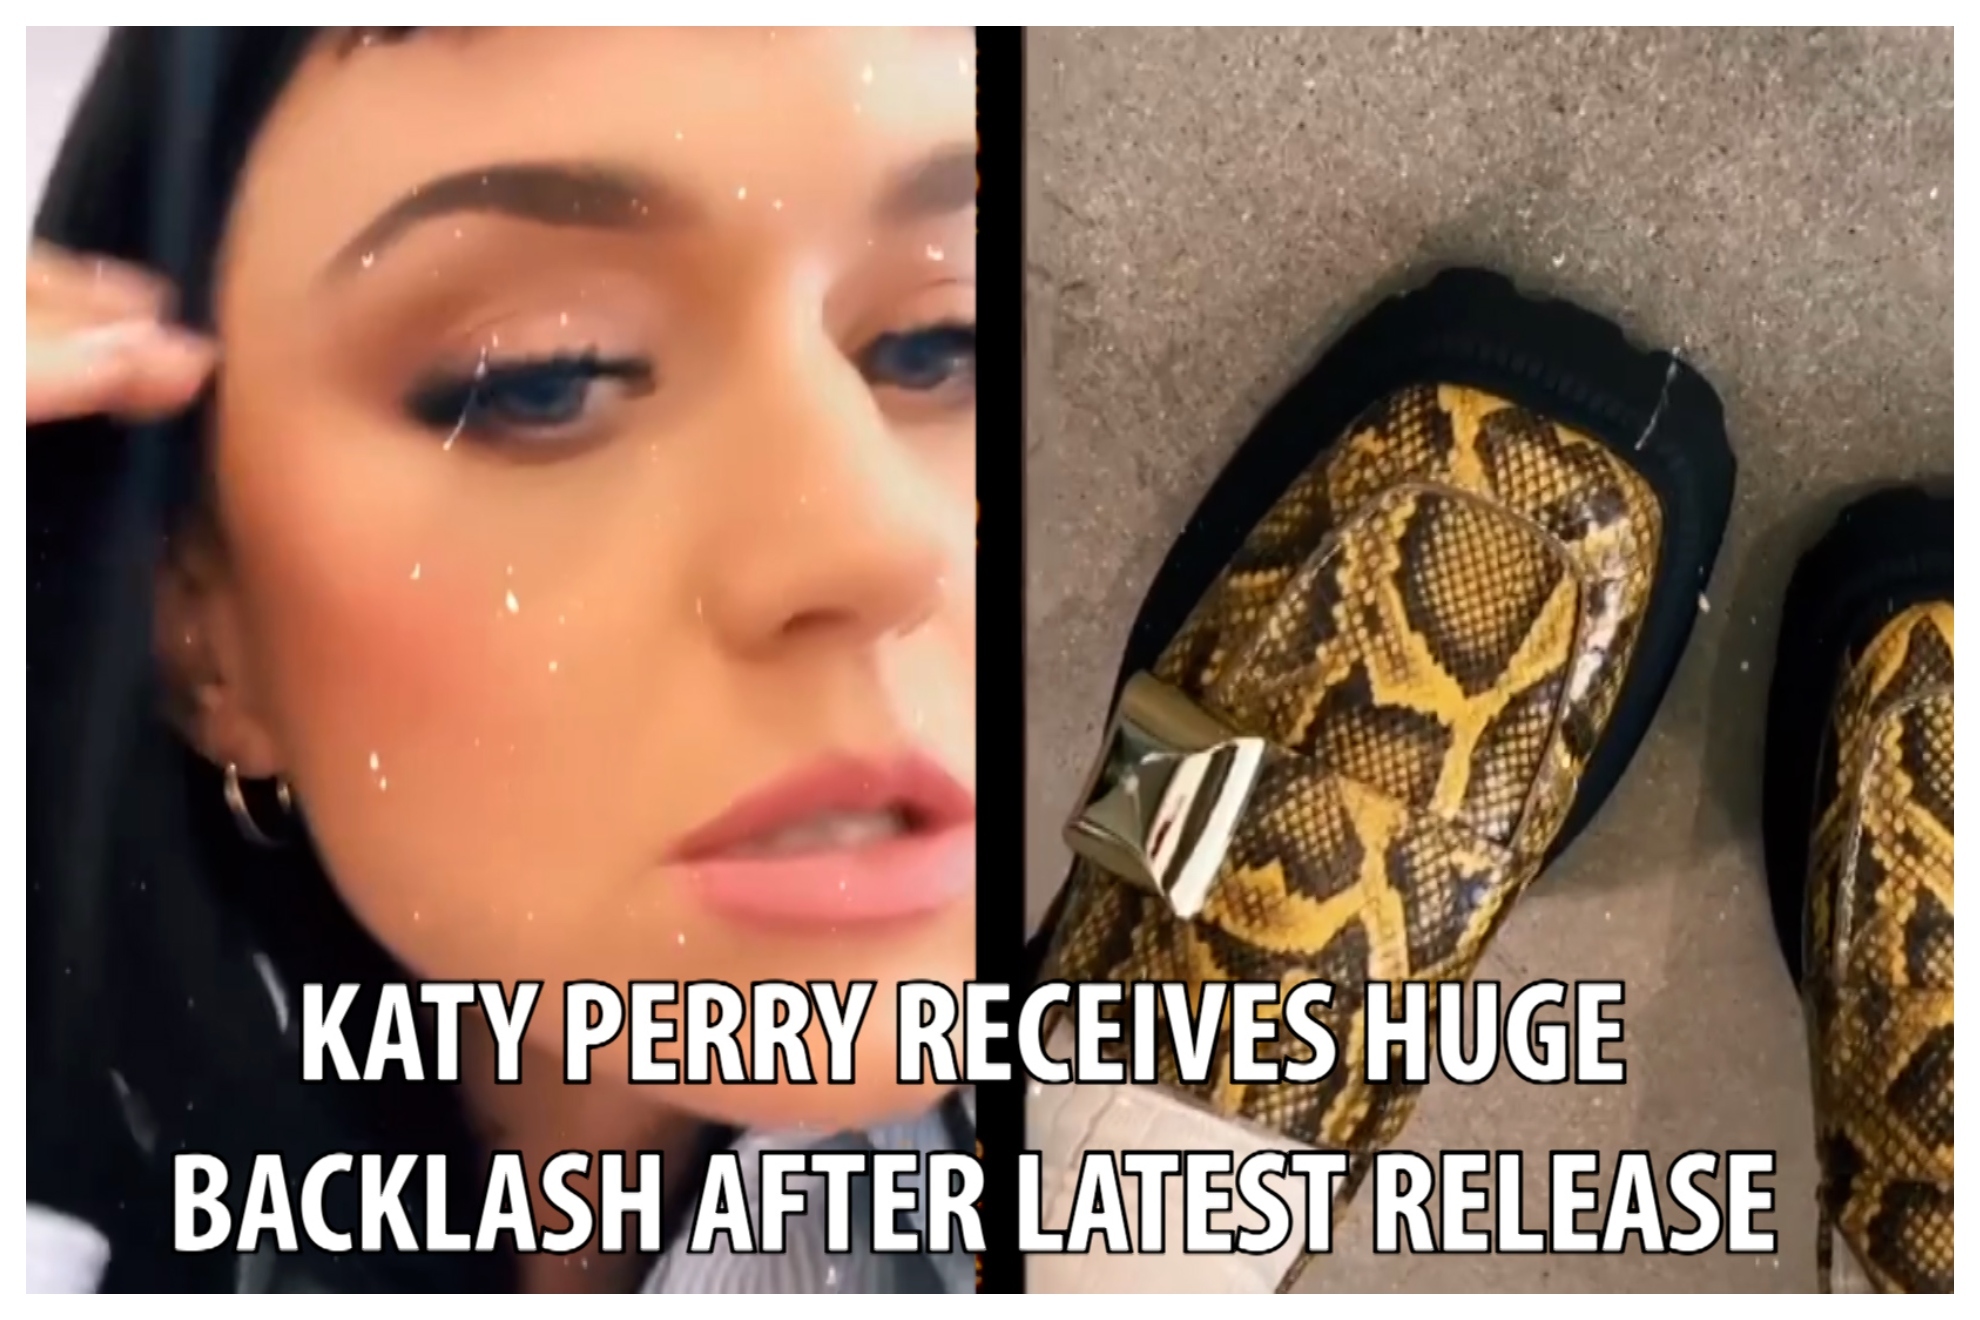 Katy Perry receives huge, unexpected backlash after latest commercial release